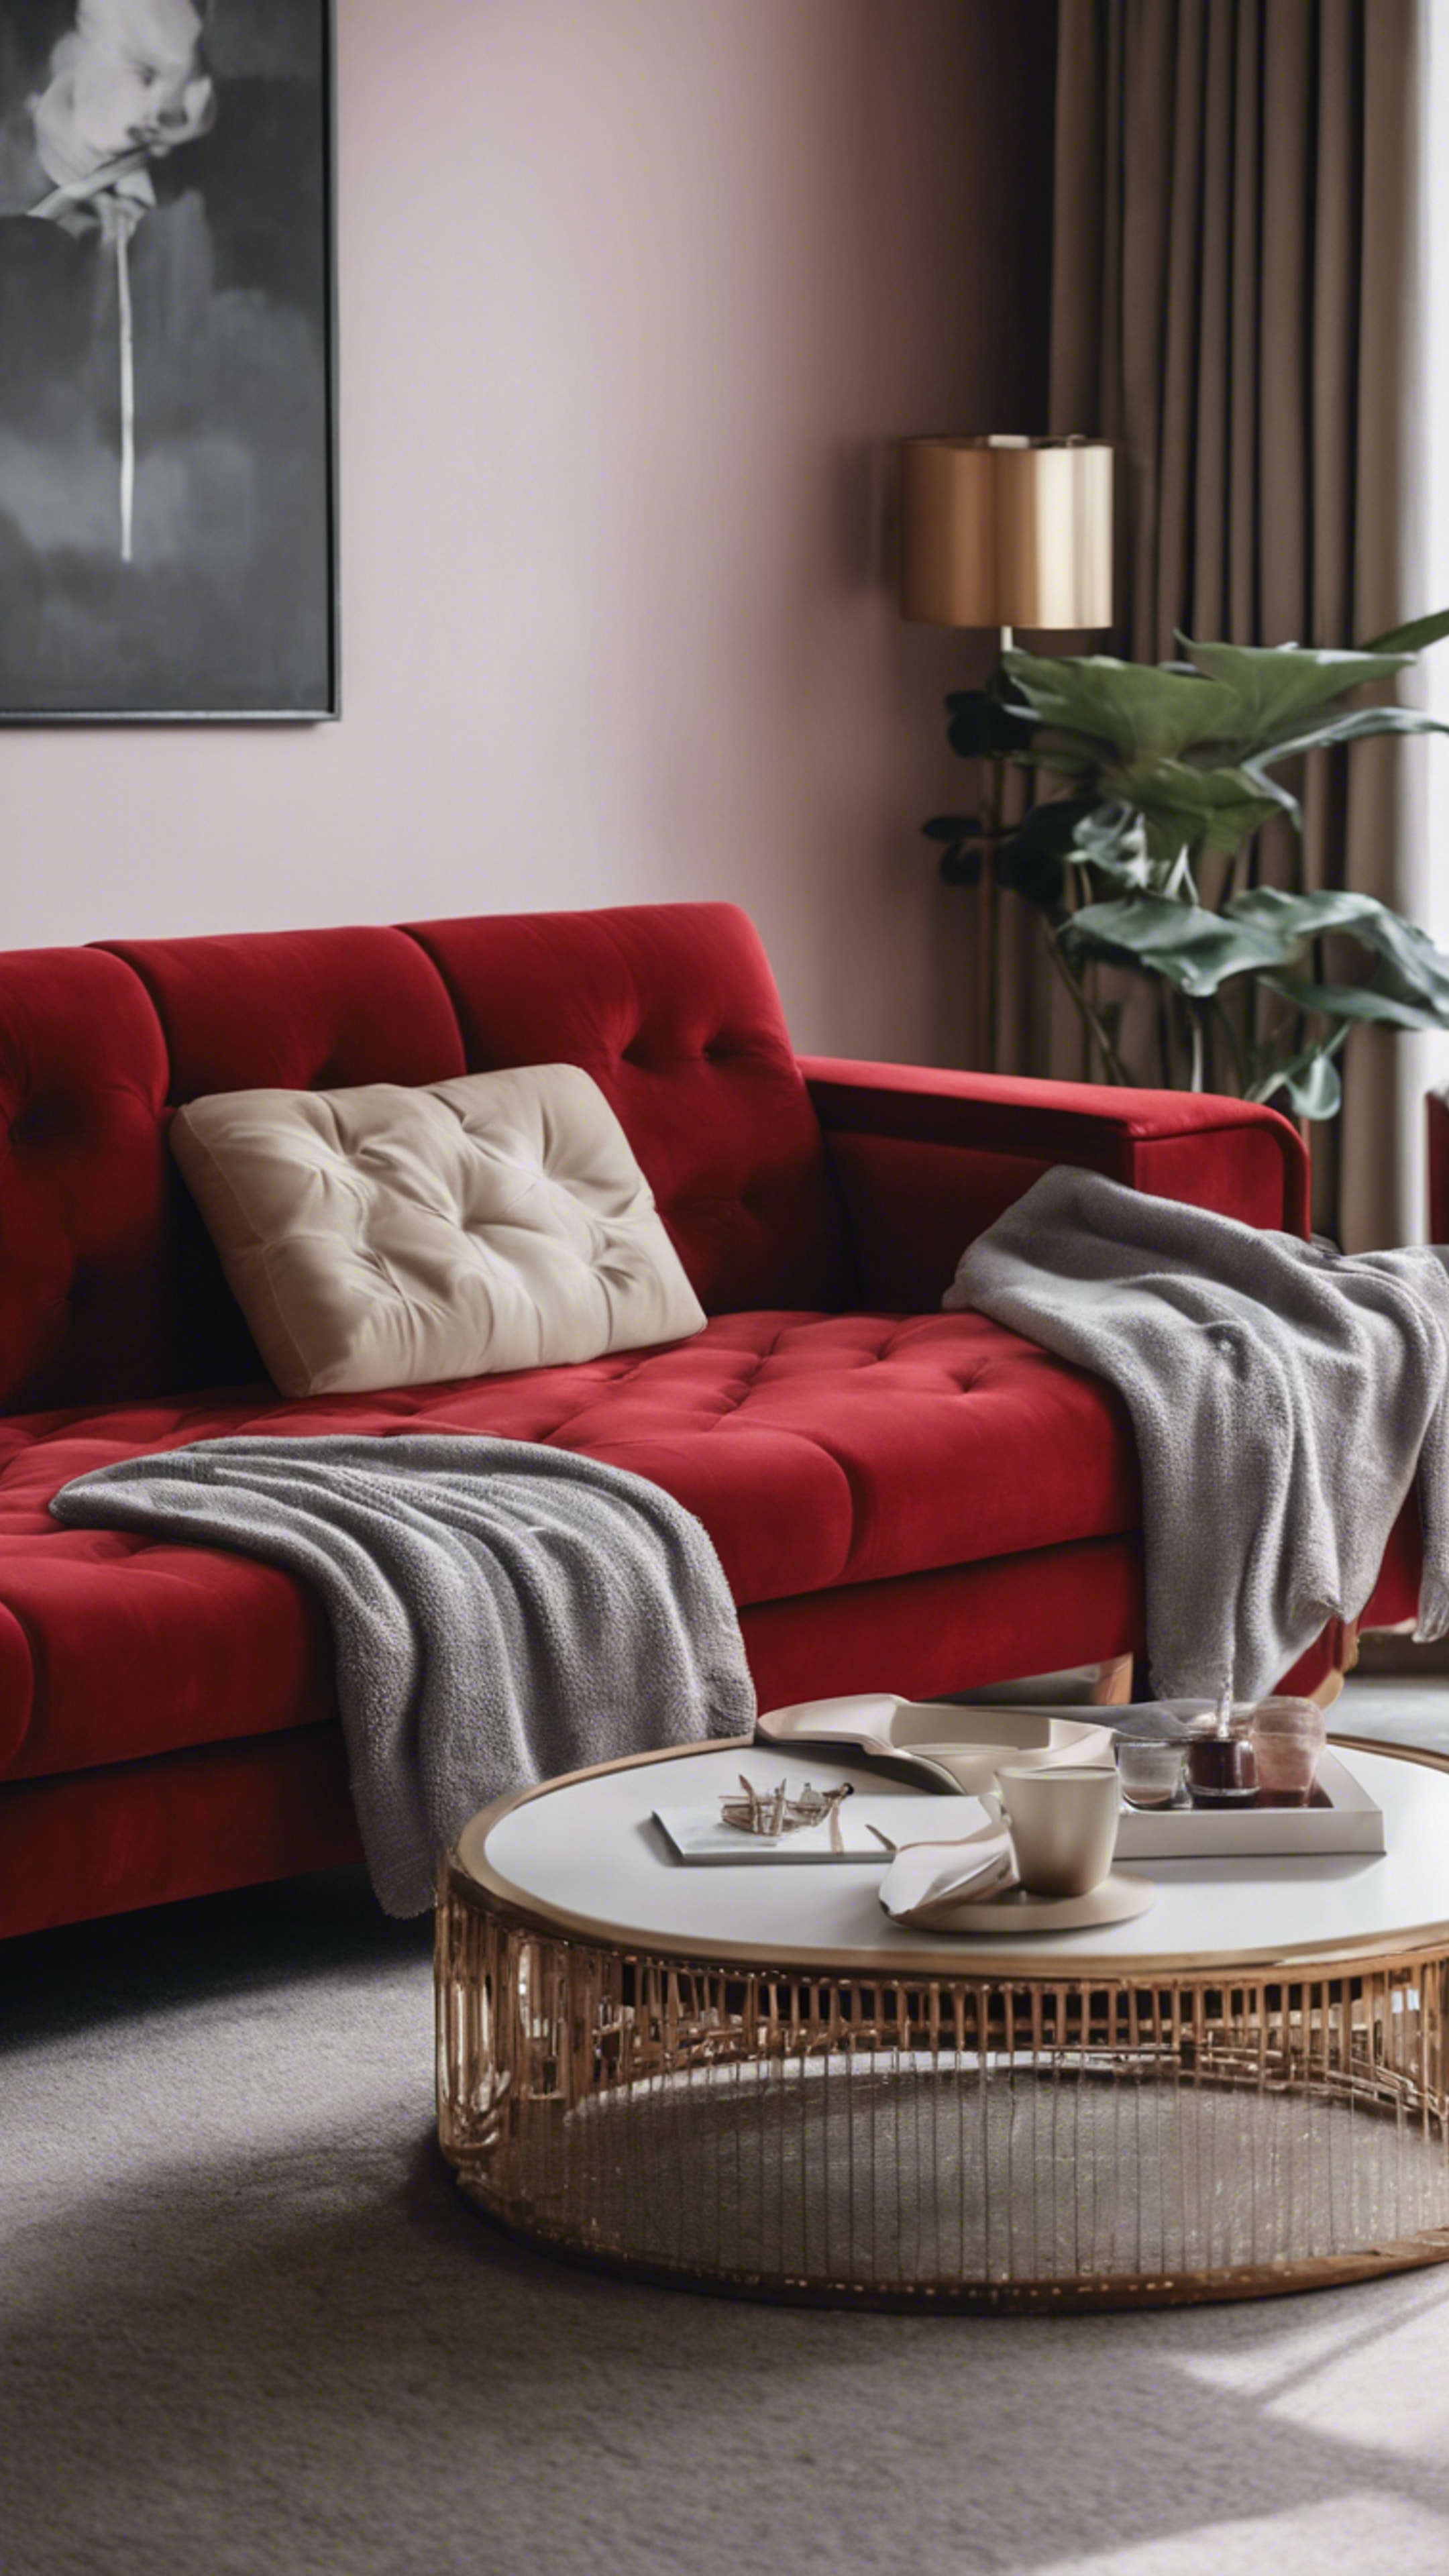 A luxurious red velvet sofa in a minimalistic modern living room, its color standing out in an otherwise neutral scene. Hình nền[9f5c54c2b7d04d069b86]